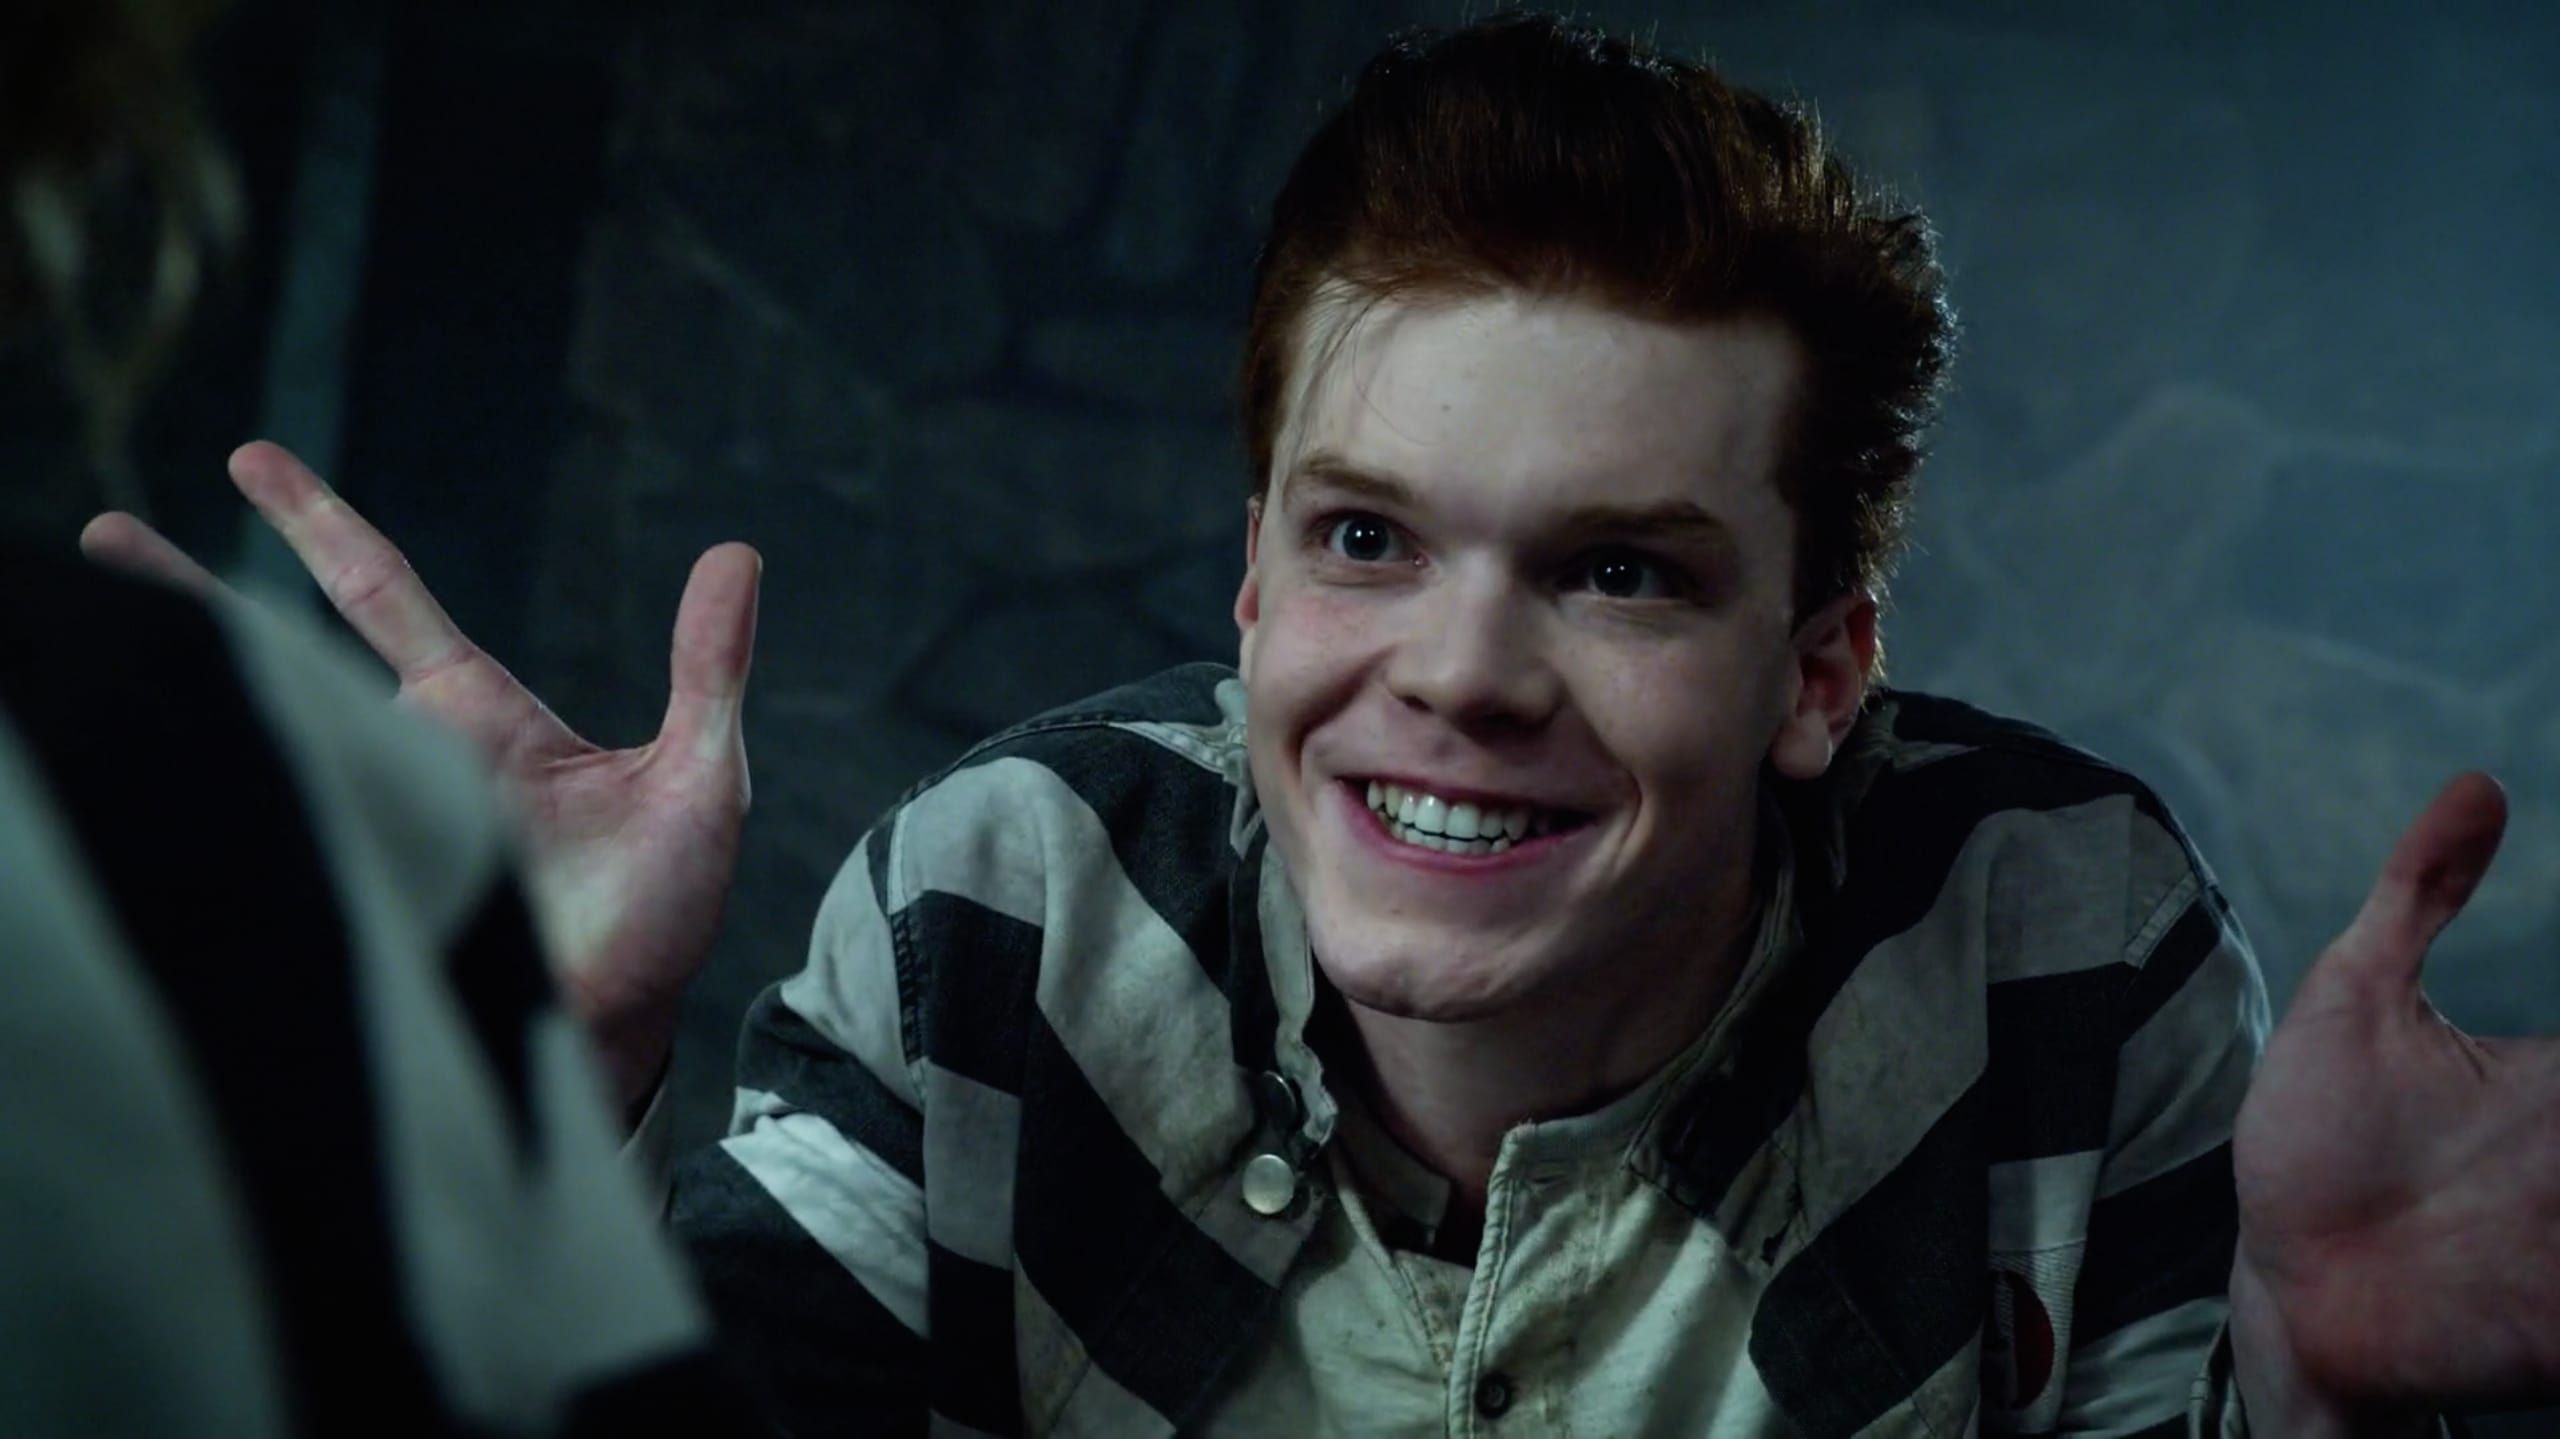 Cameron Monaghan Wallpaper Image Photo Picture Background